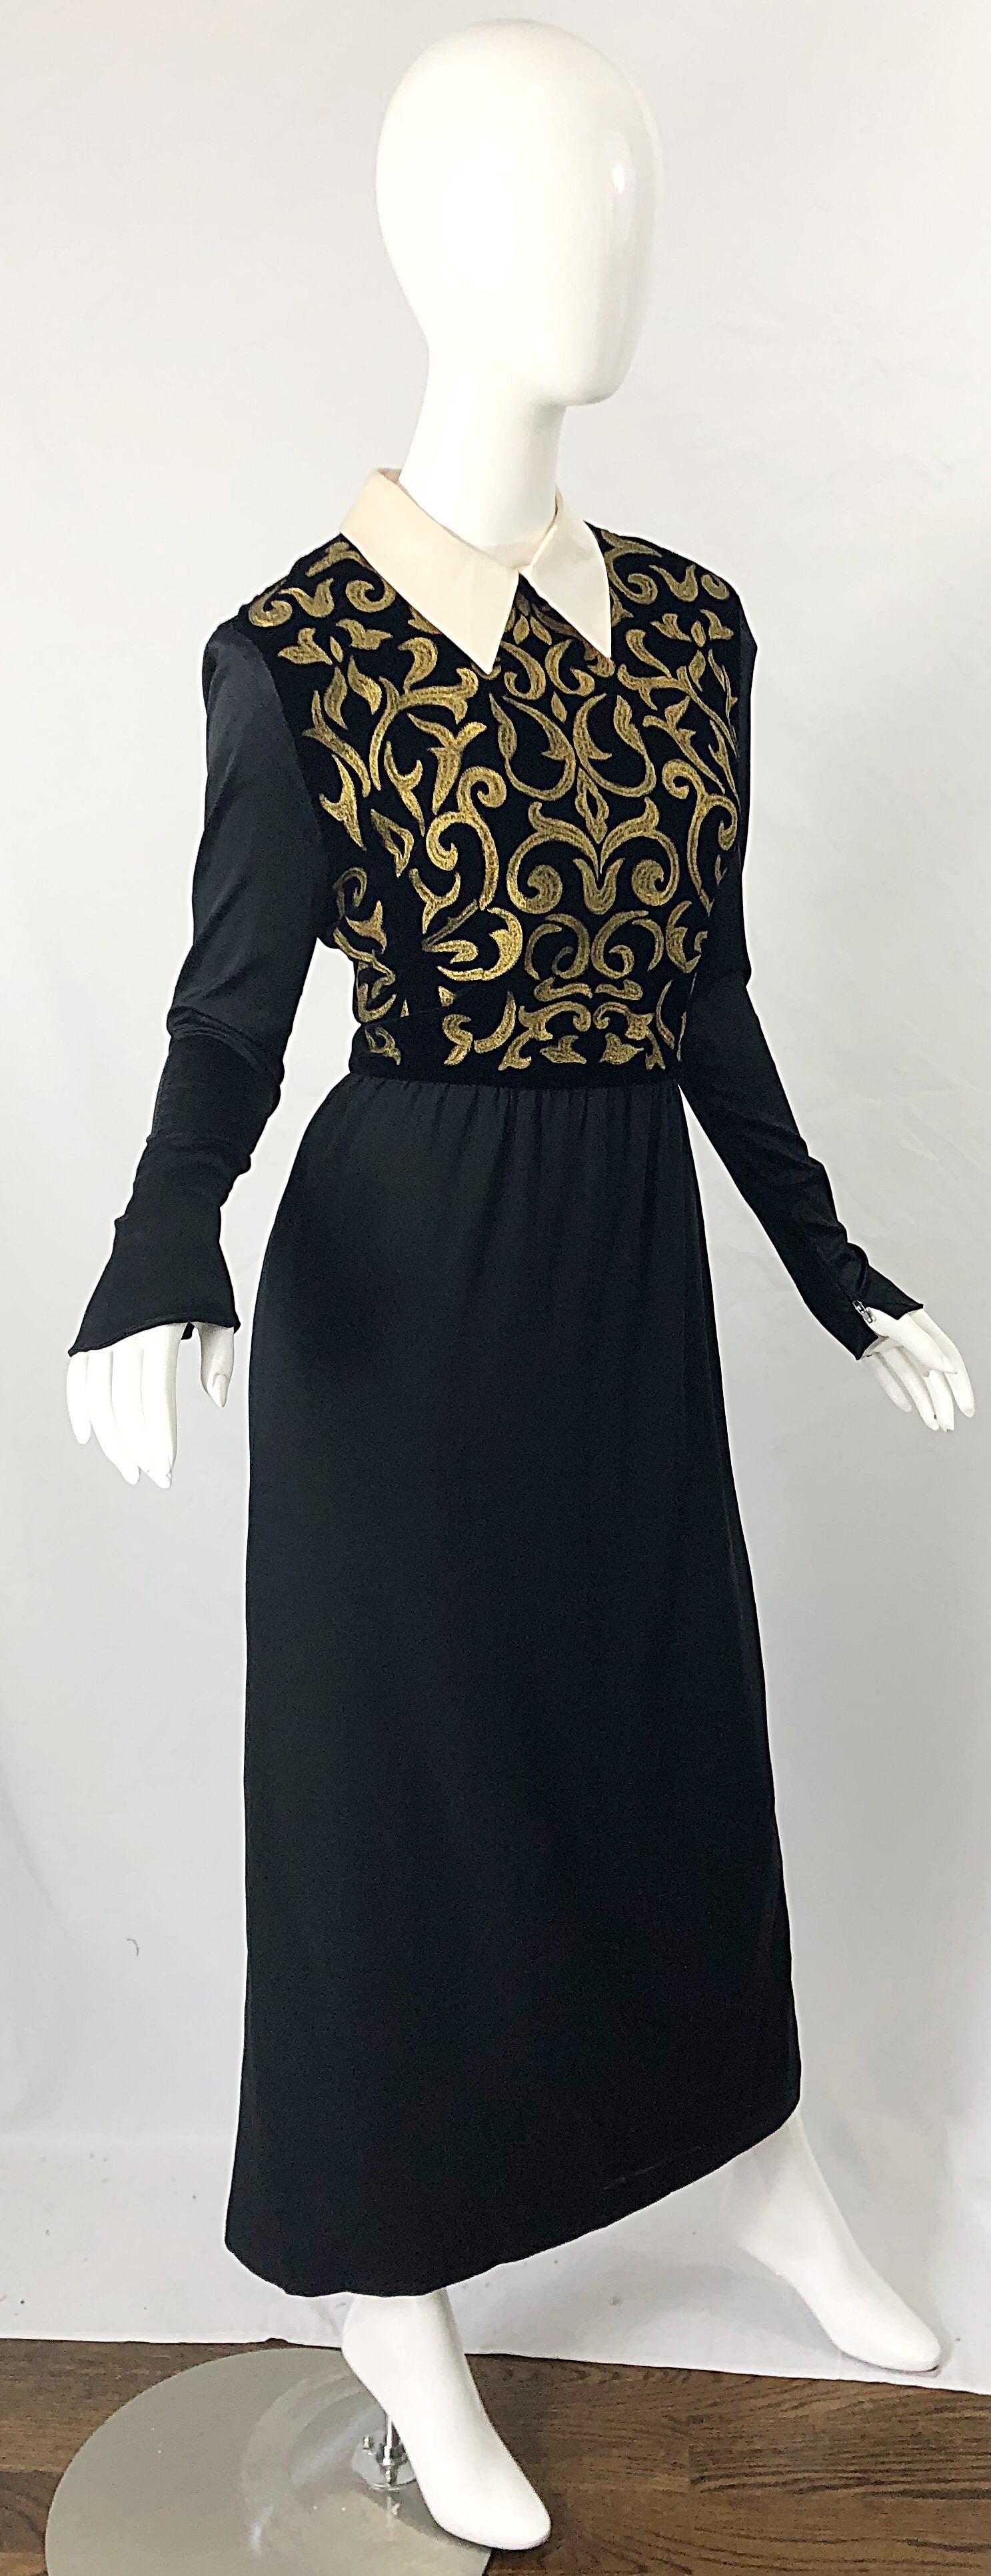 Karl Lagerfeld Runway Fall 1988 Black Gold Embroidered Vintage 80s Gown Dress For Sale 5